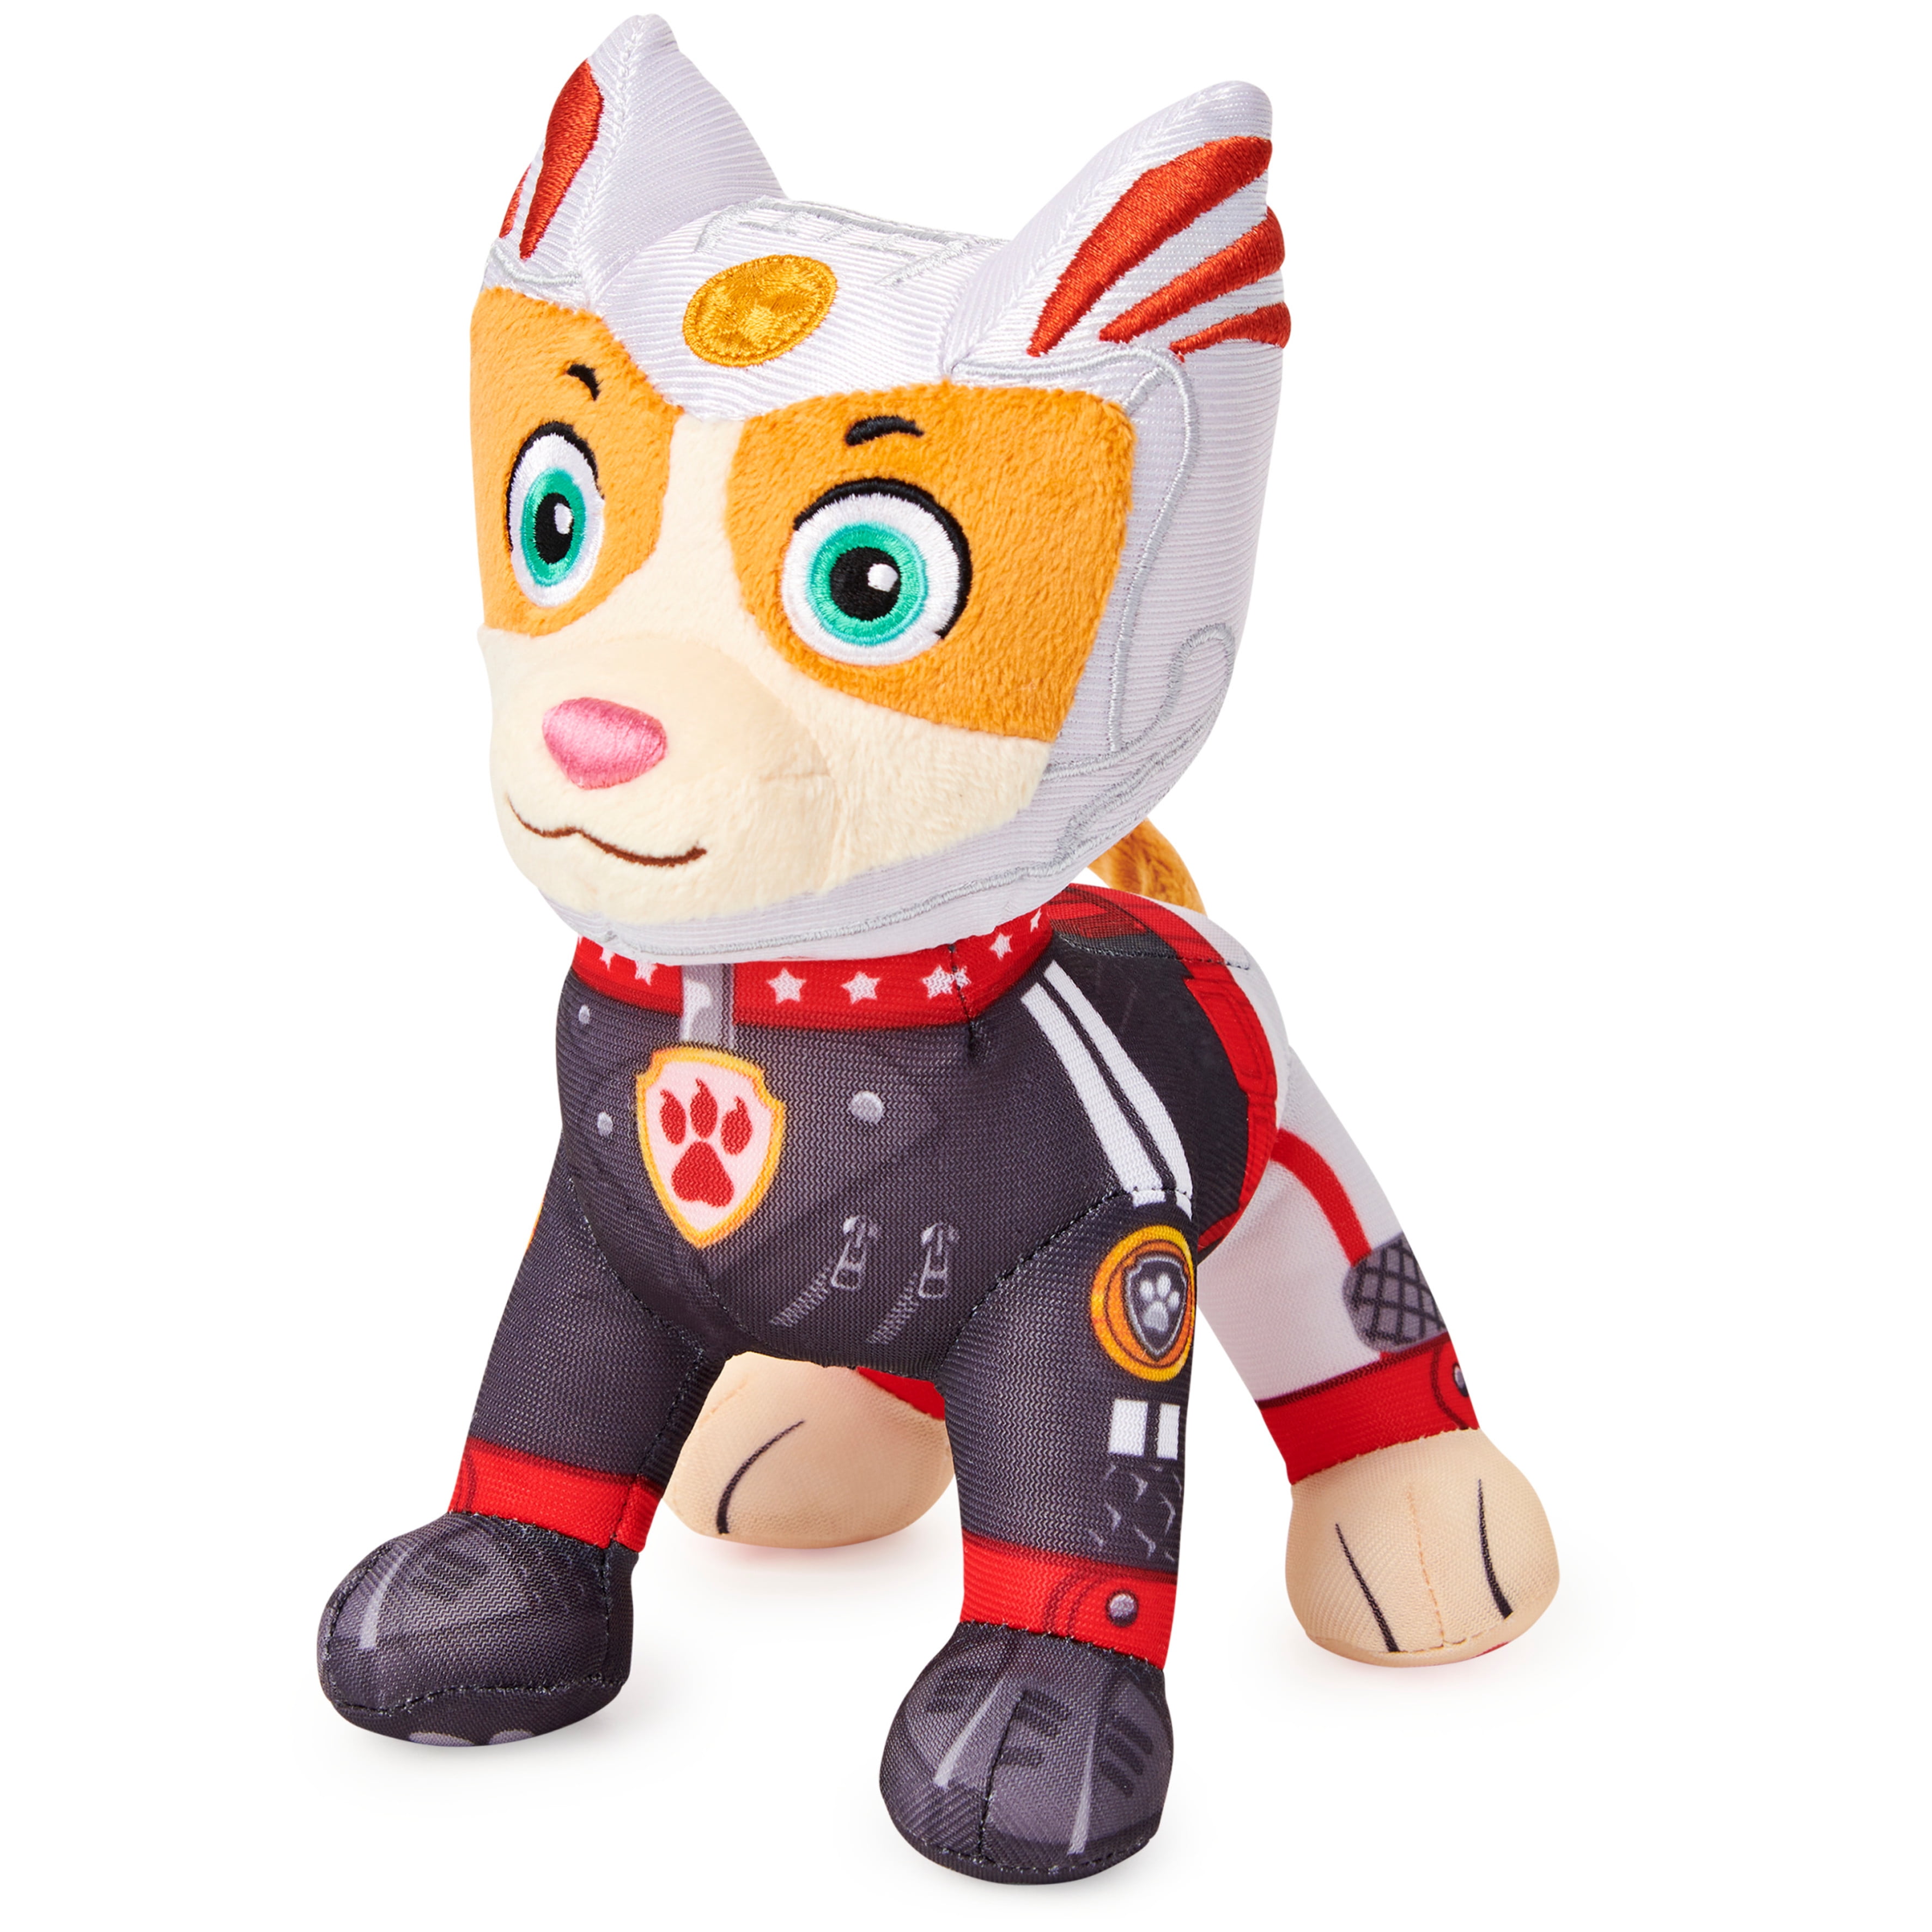 add 2 to cart Paw Patrol 8" Plush Pup Pals---Authentic!!! Buy 1 Get 1 25% OFF